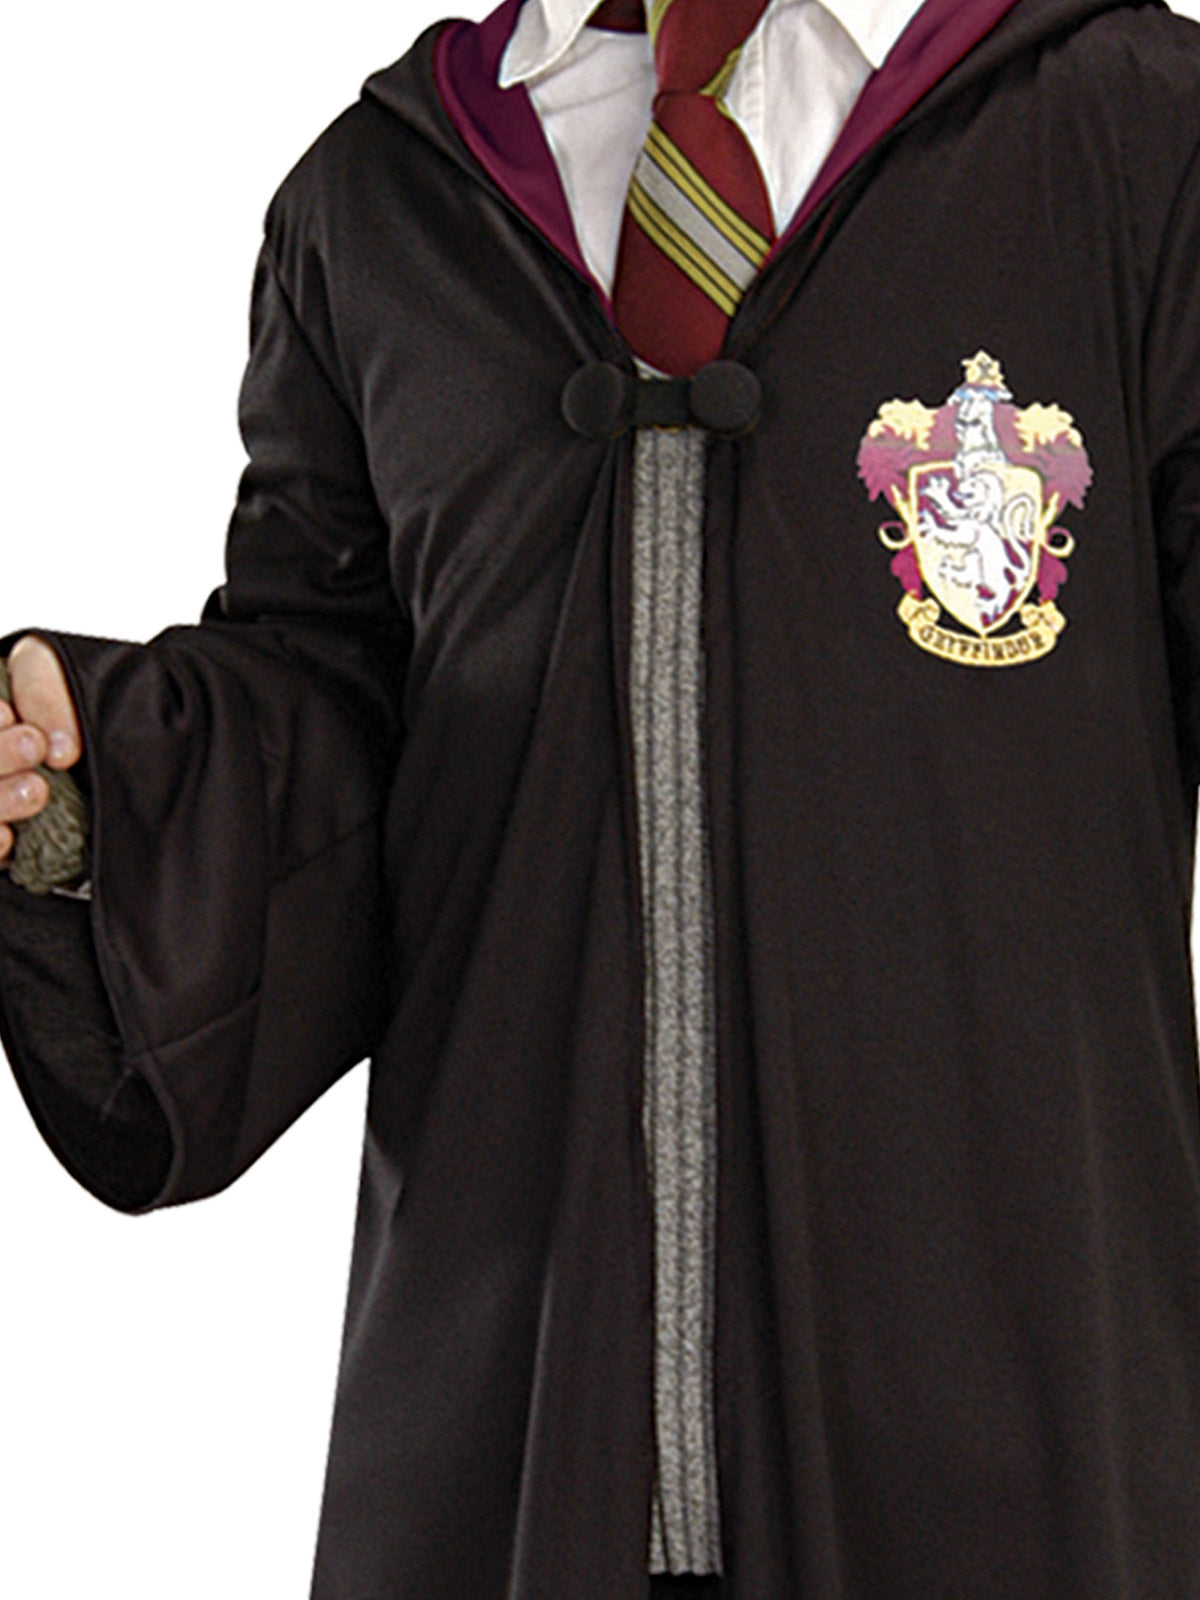 Harry Potter Child Costume Kit with Robe, Glasses and Plastic Wand, Licensed